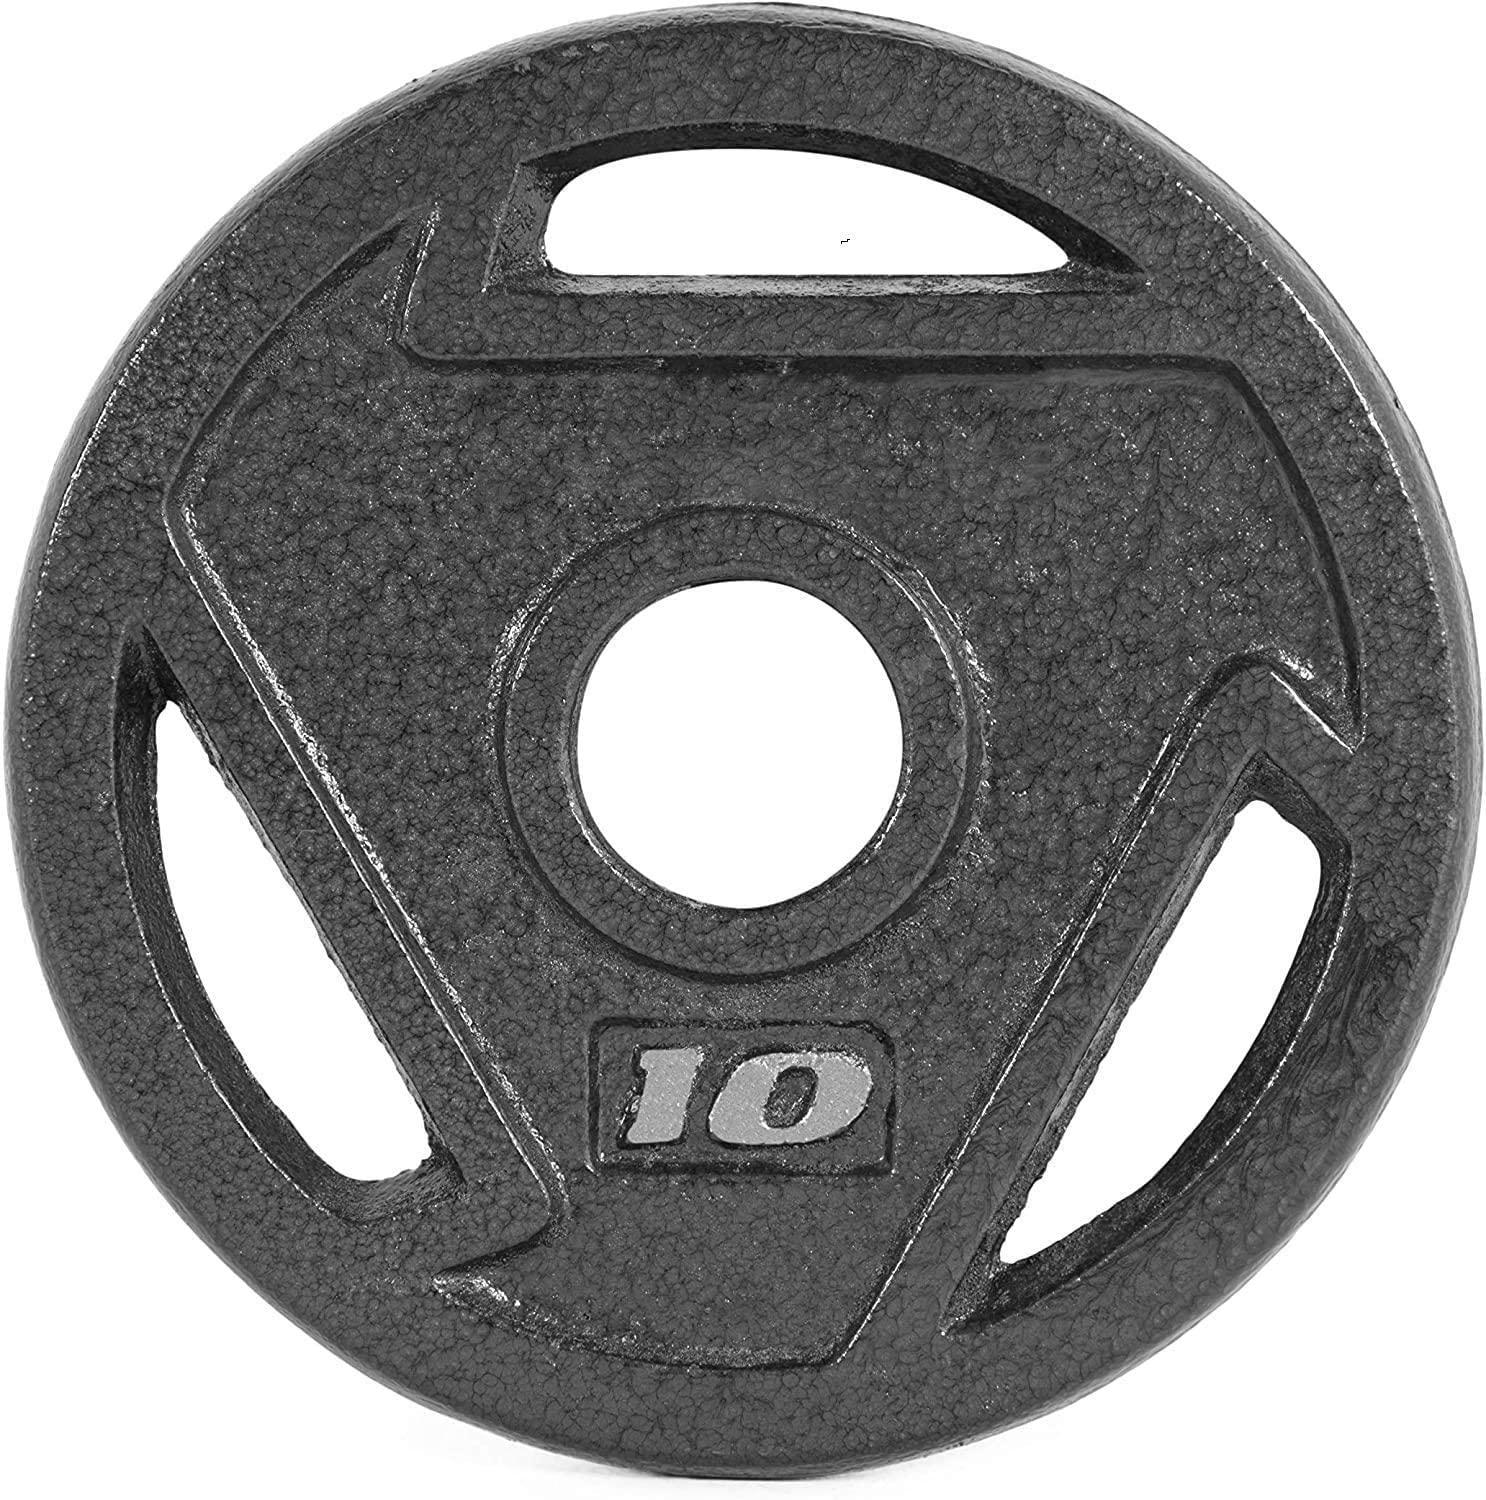 CAP Barbell 2-Inch Olympic Grip Weight Plate Set